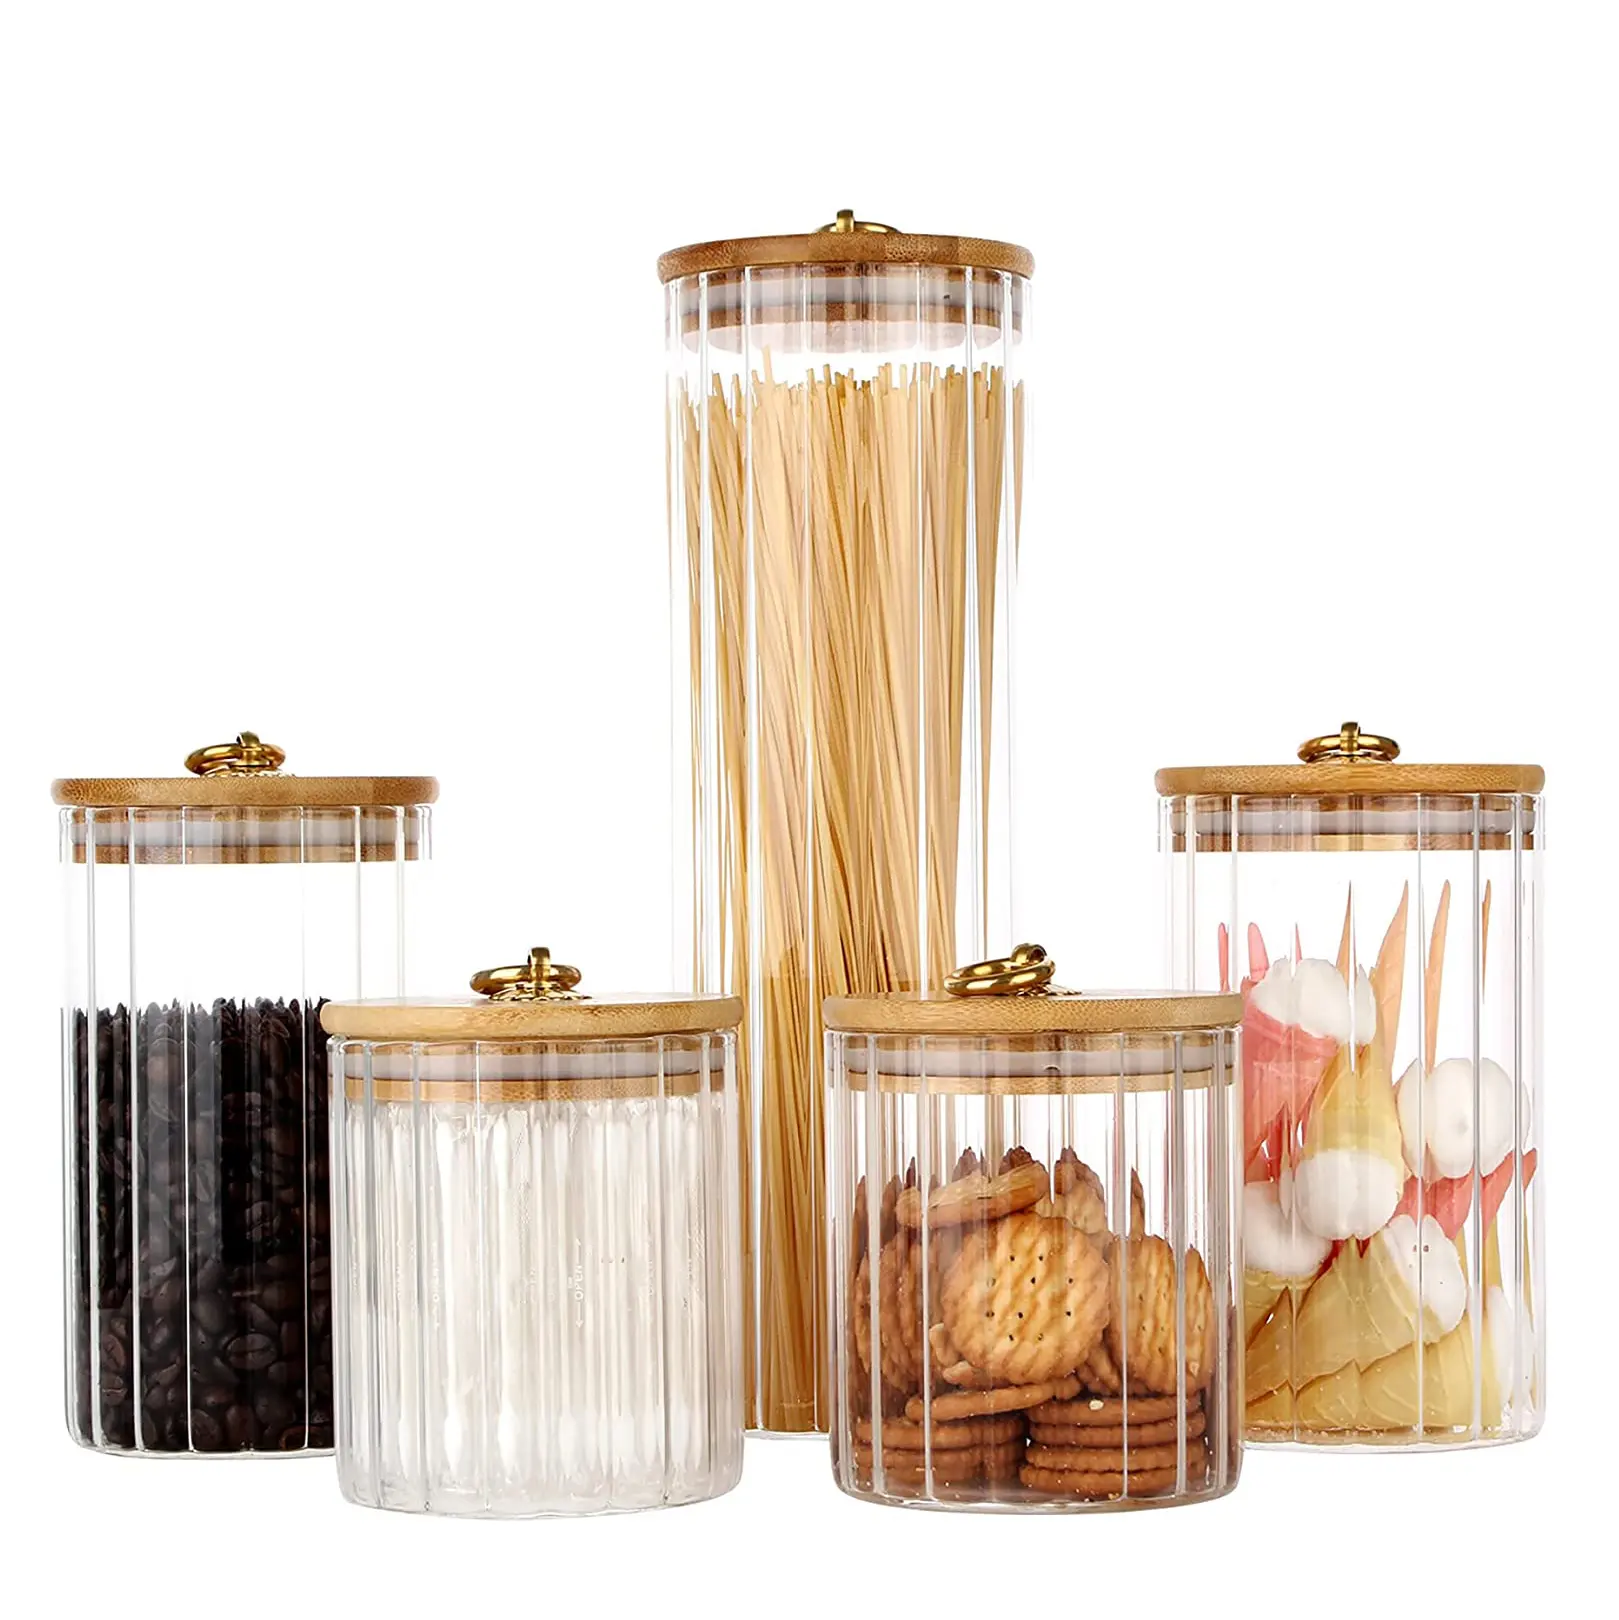 Amazon Top Selling Sellers Kitchen Food Tea Coffee Bar Glass Storage Jar Bottles Jars Container Set with Bamboo Lid Metal Handle